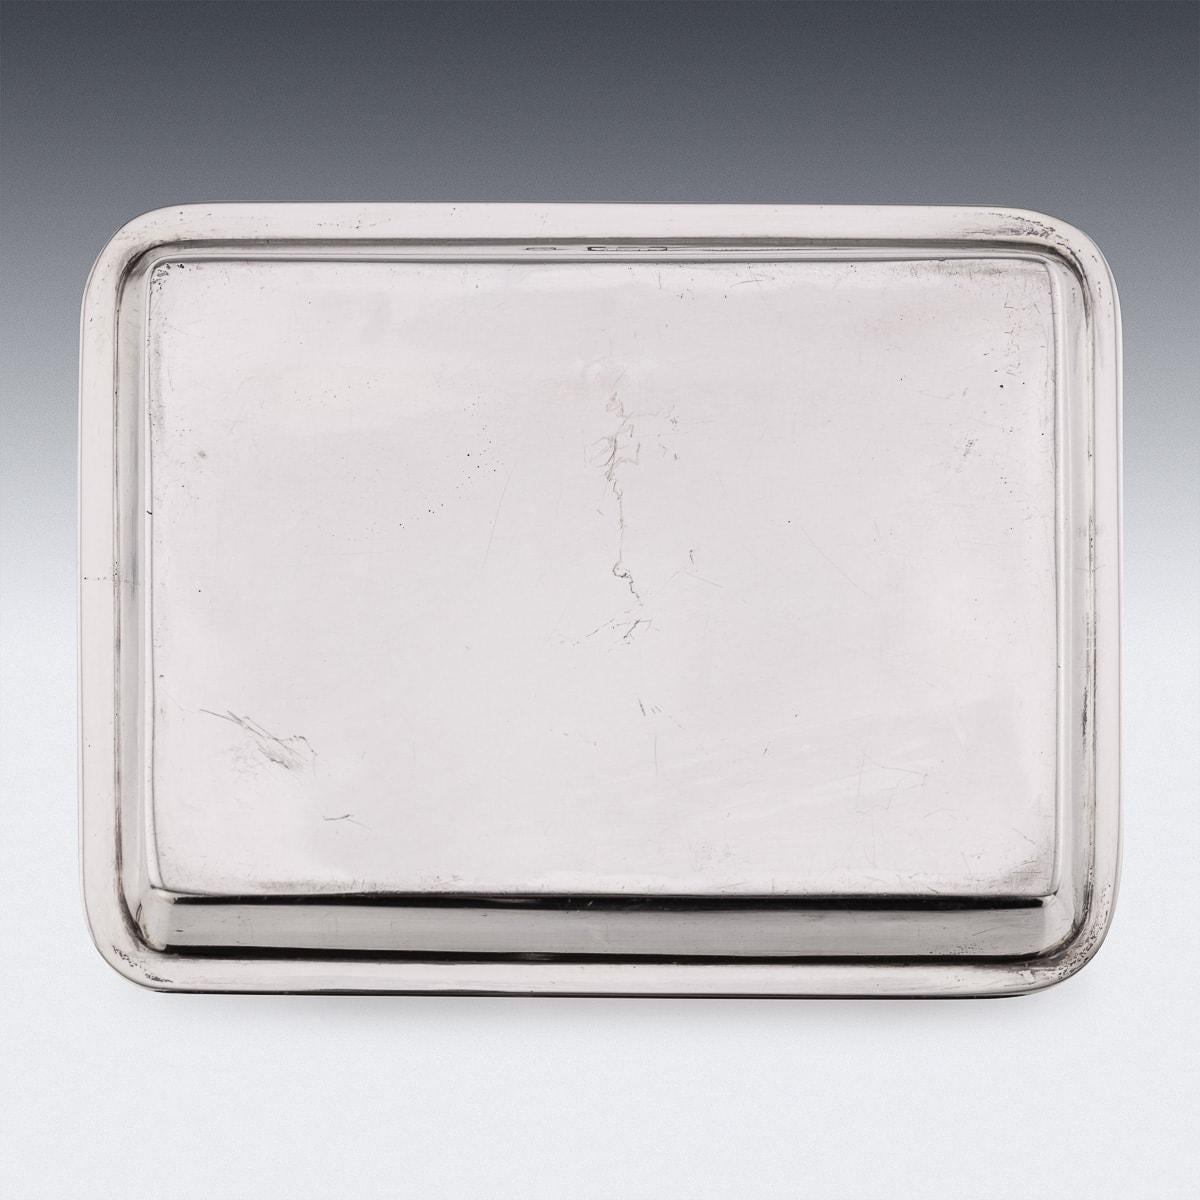 Antique 20th Century Art Deco Solid Silver & Enamel Tray, London c.1919 In Good Condition For Sale In Royal Tunbridge Wells, Kent